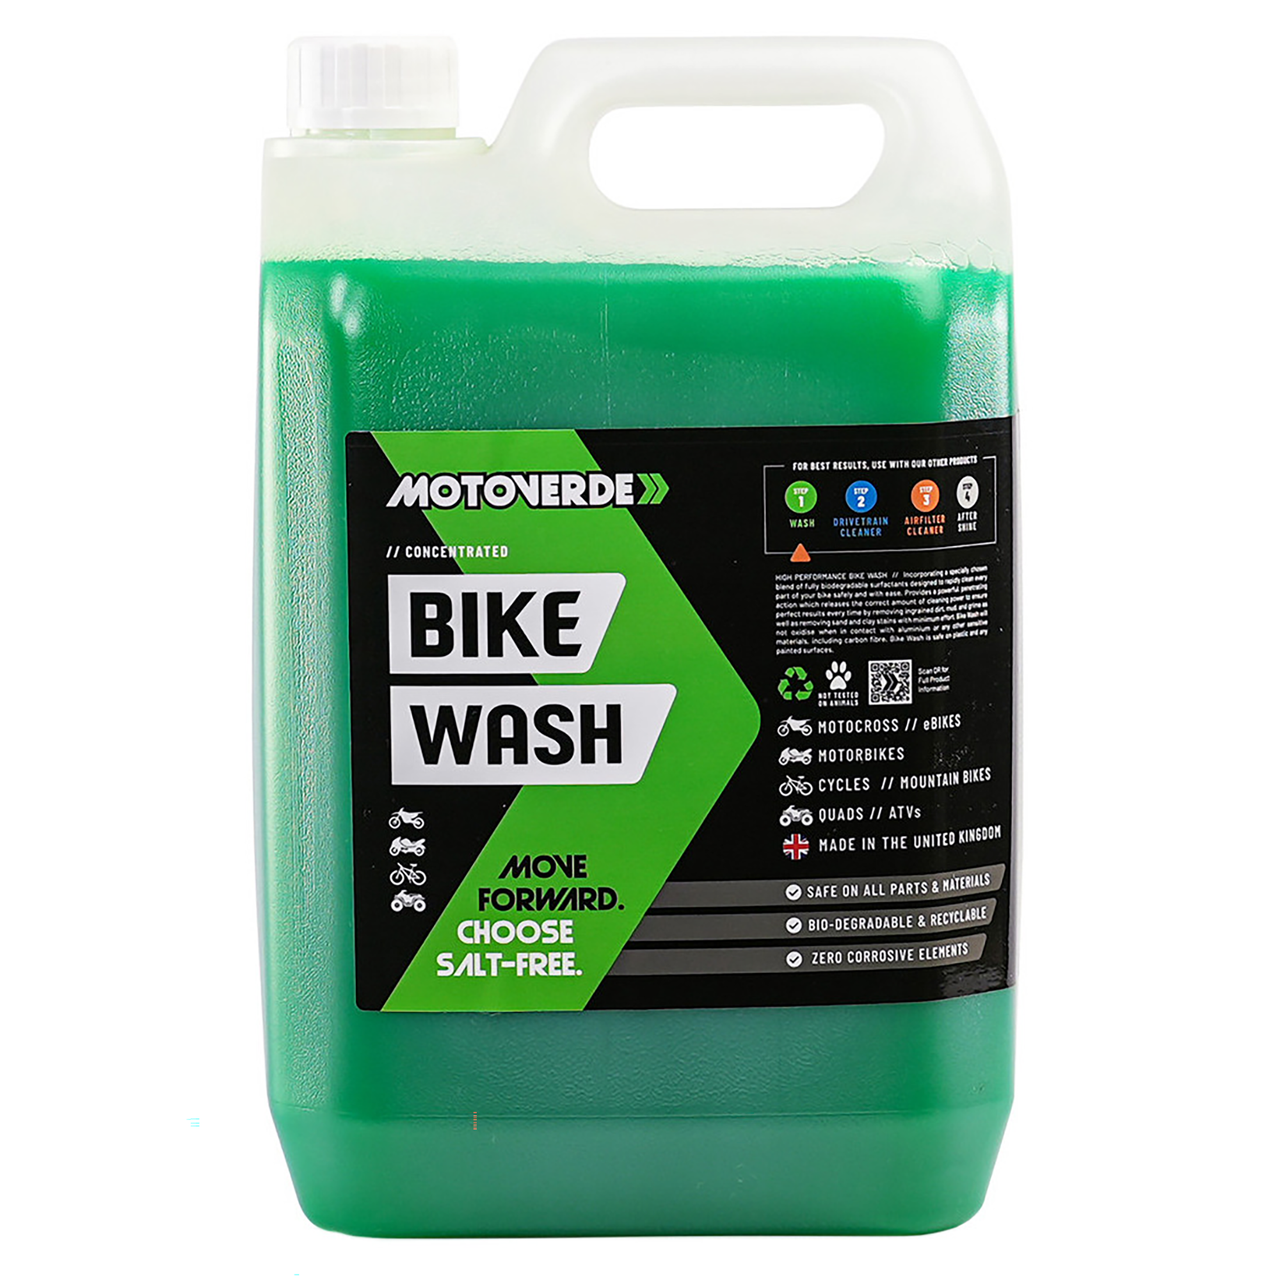 Motoverde Bike Wash Concentrated 5 Litre Refill